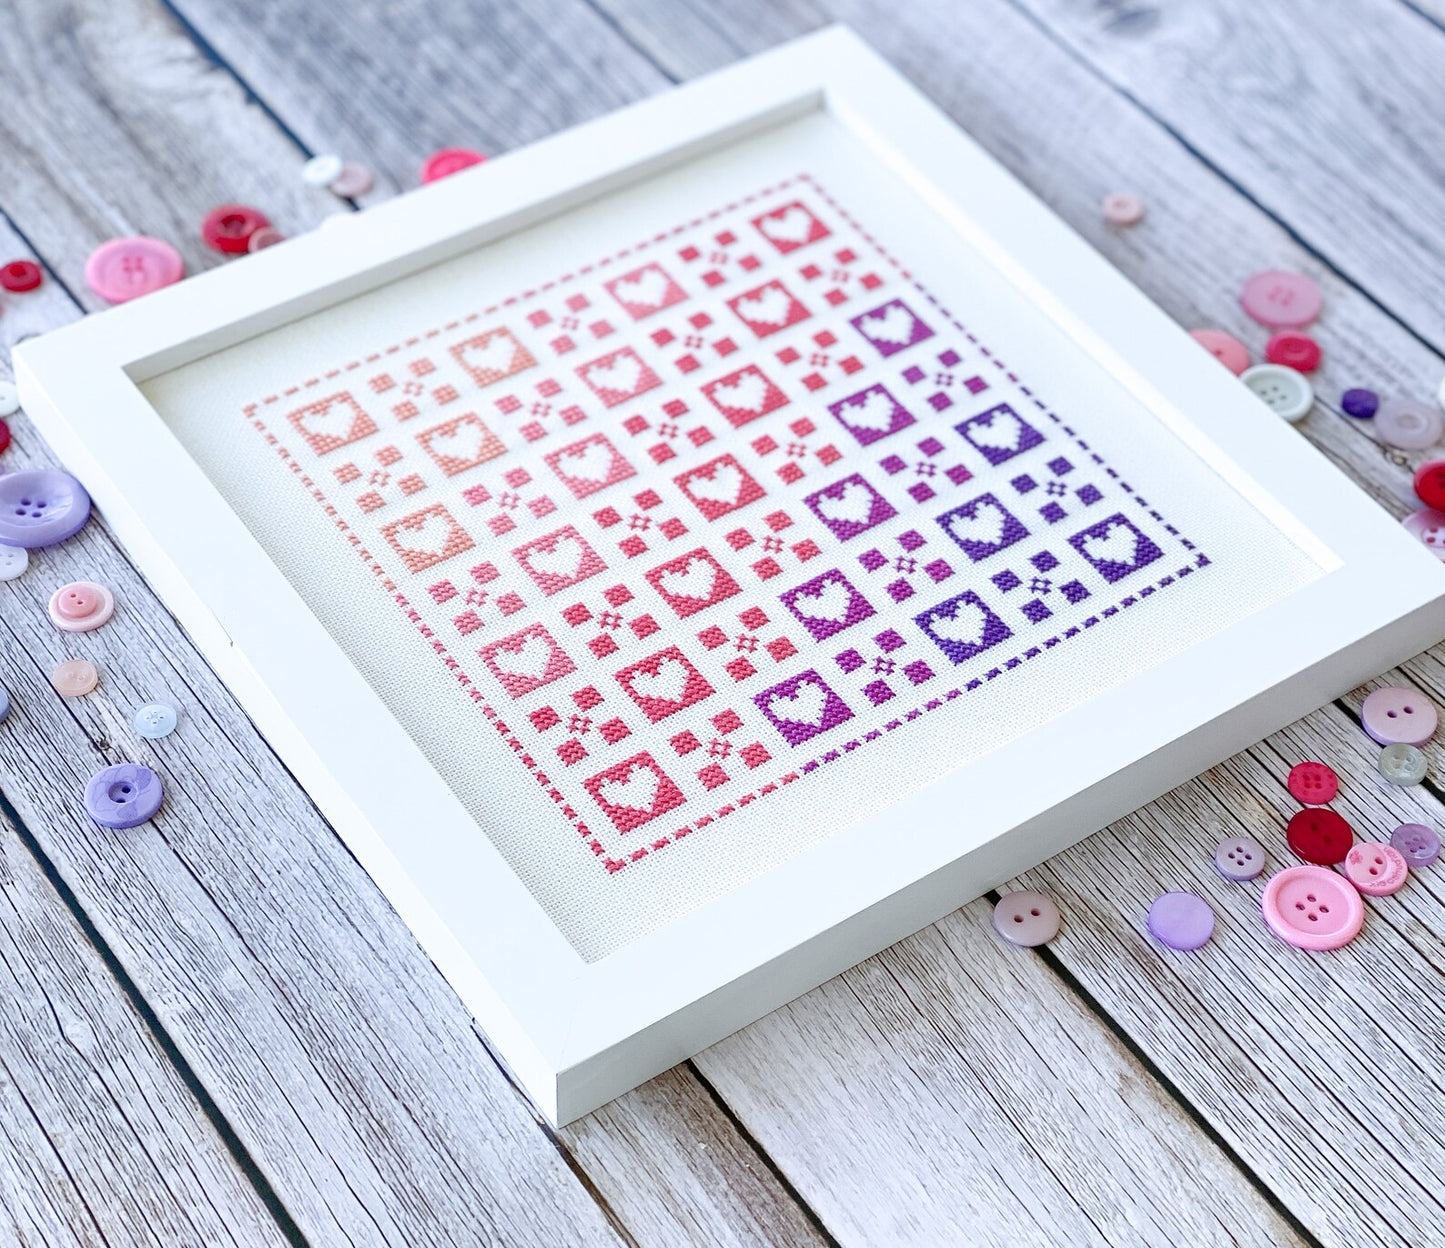 Sweet Heart Cross Stitch Pattern by Count Your Stitches Designs